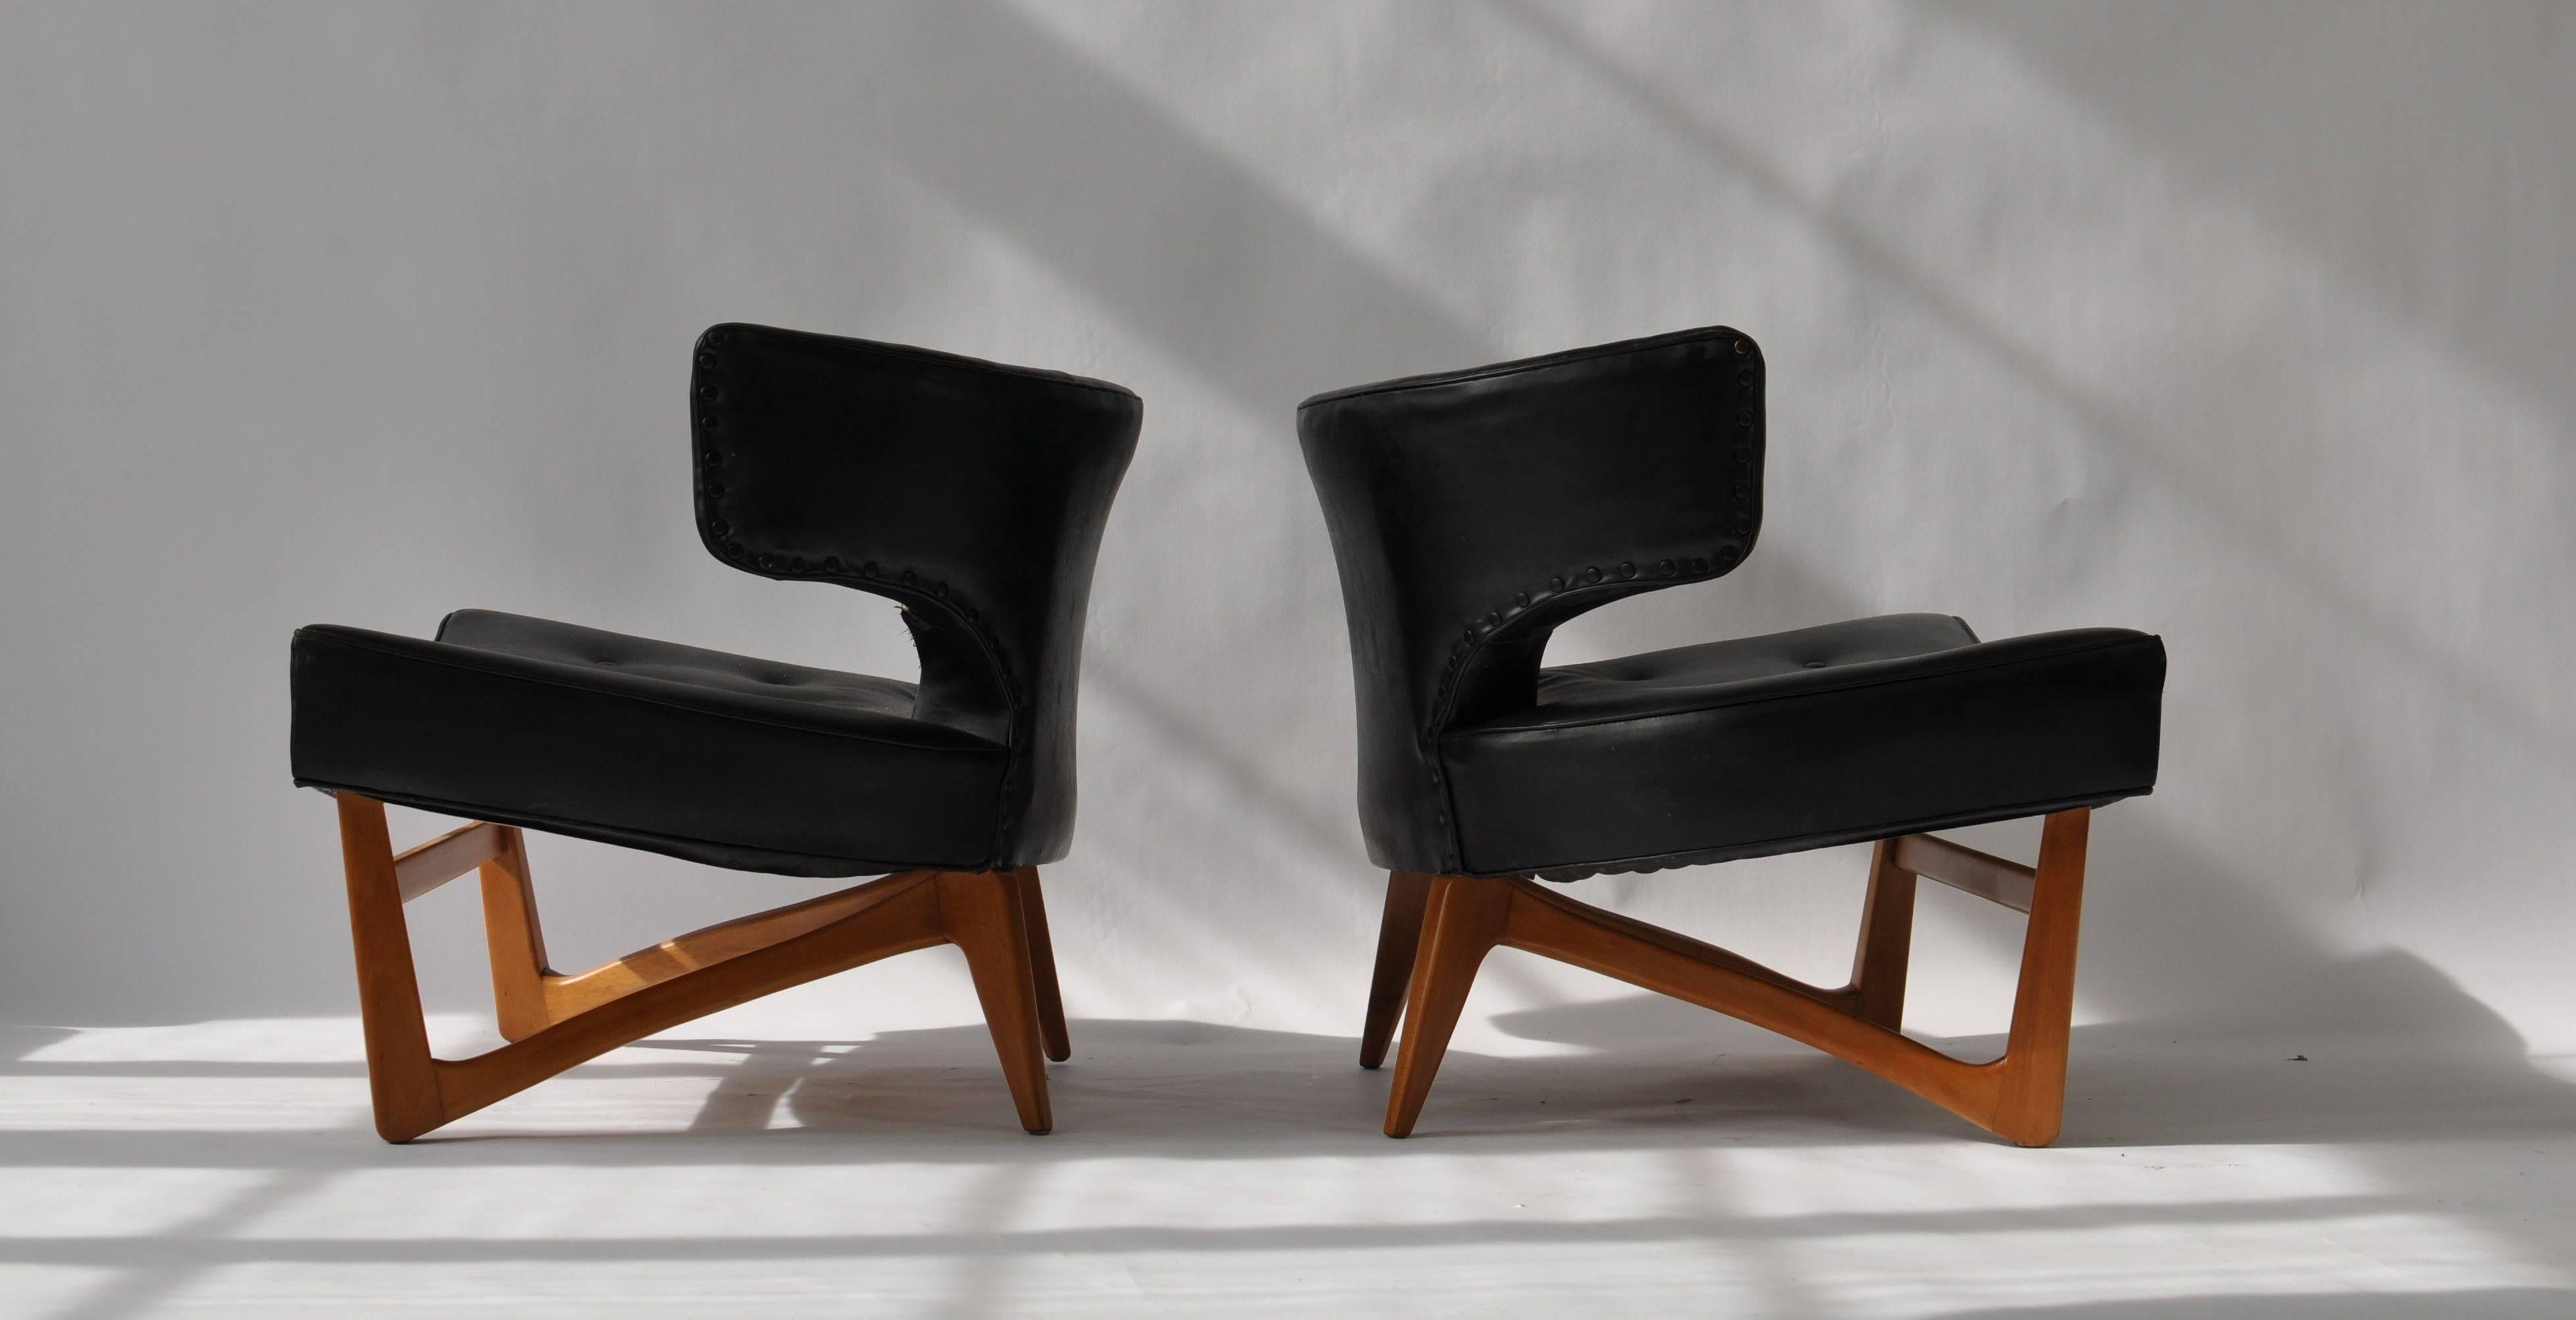 Pair of sculptural lounge chairs.